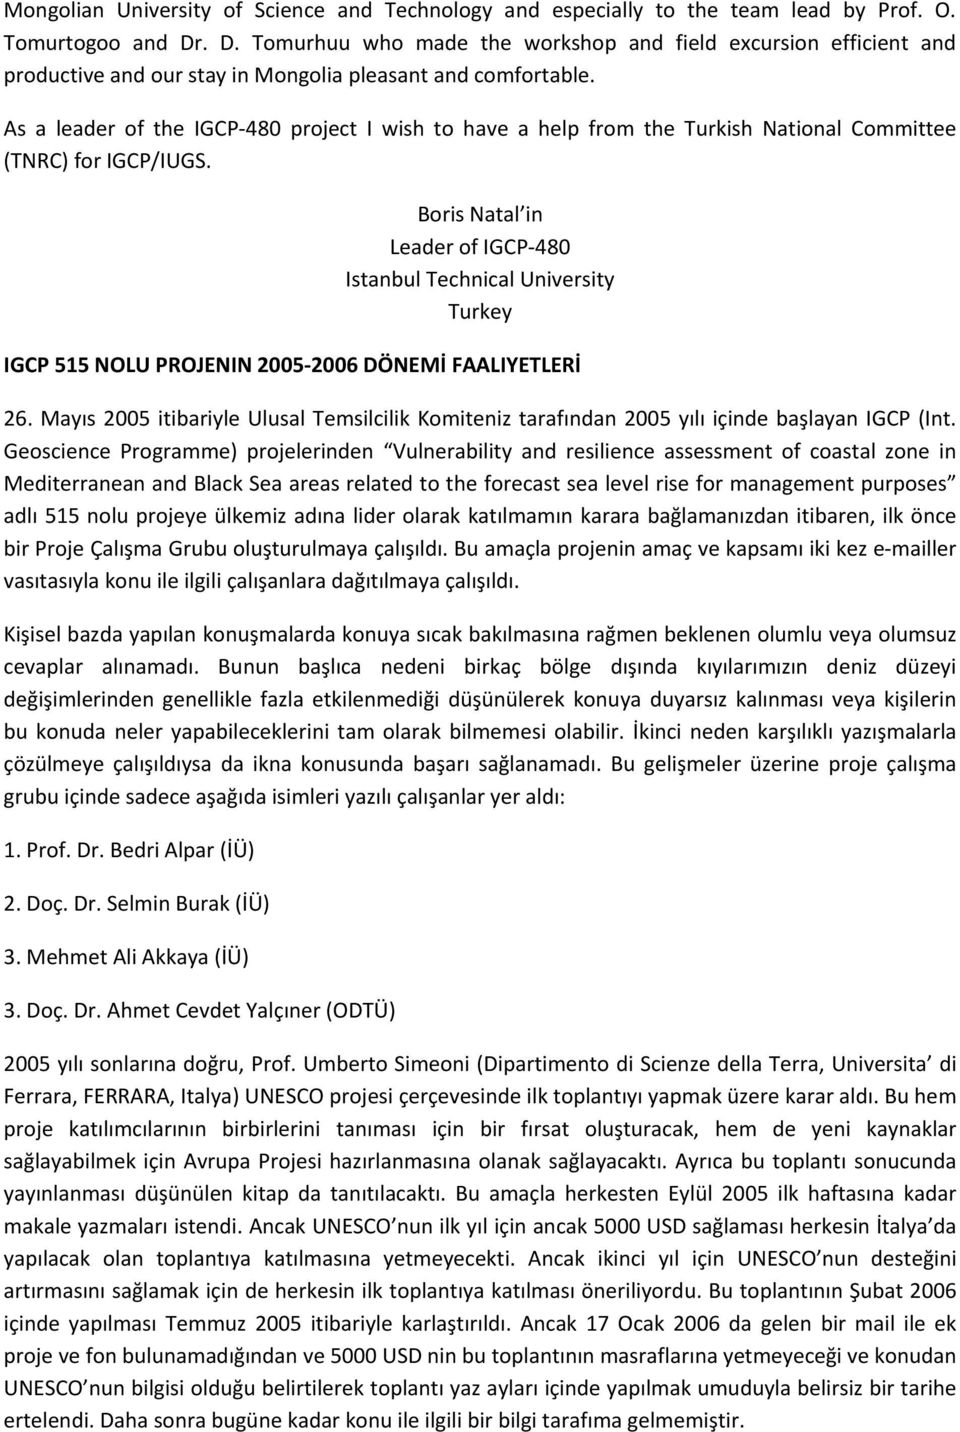 As a leader of the IGCP-480 project I wish to have a help from the Turkish National Committee (TNRC) for IGCP/IUGS.